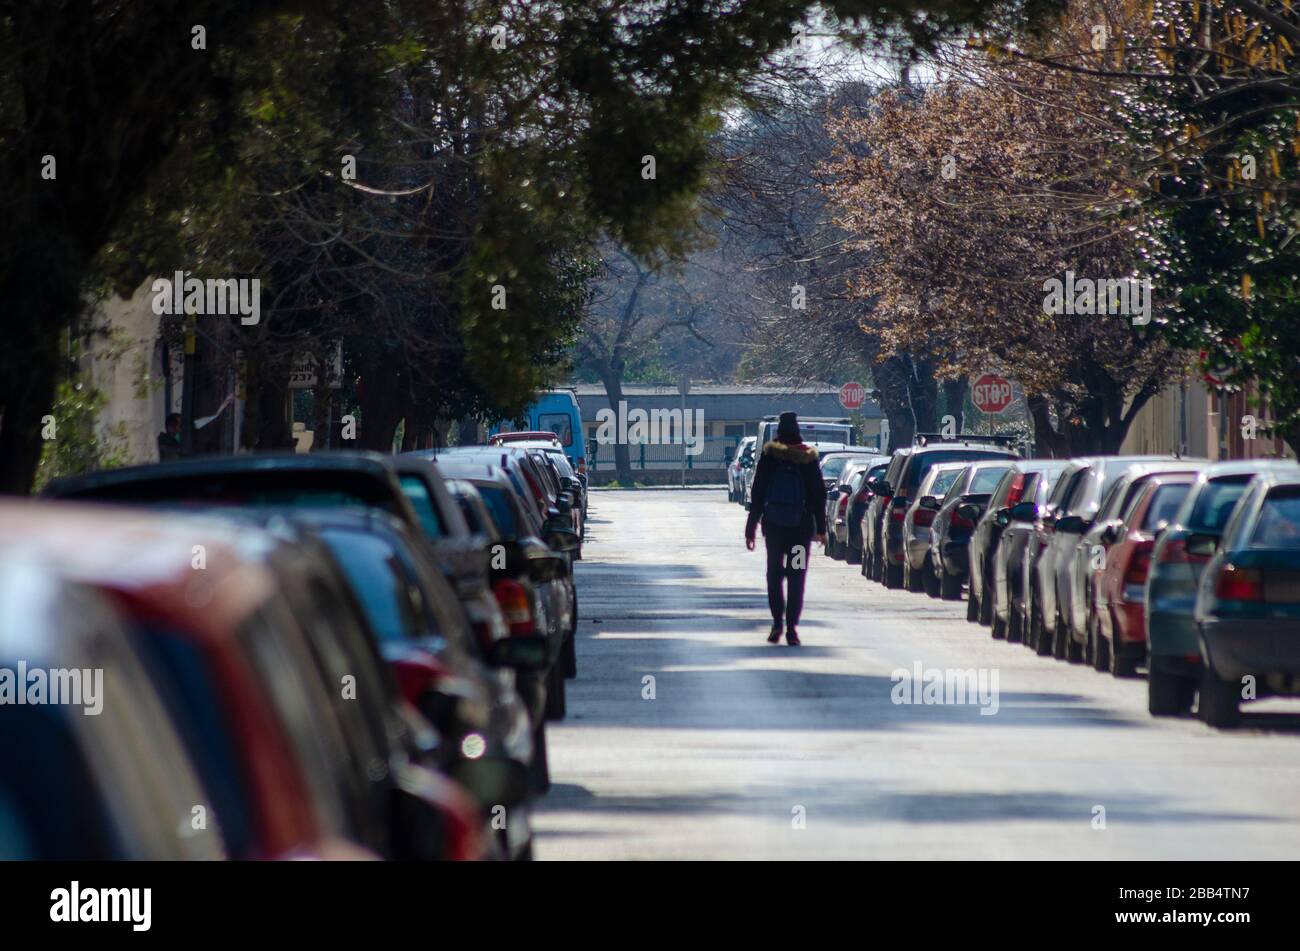 ALEXANDROUPOLI, GREECE - 21 Mar 2020 - A lone person walks in the middle of the street in Alexandroupoli Greece during the COVID-19 lockdown. Stock Photo